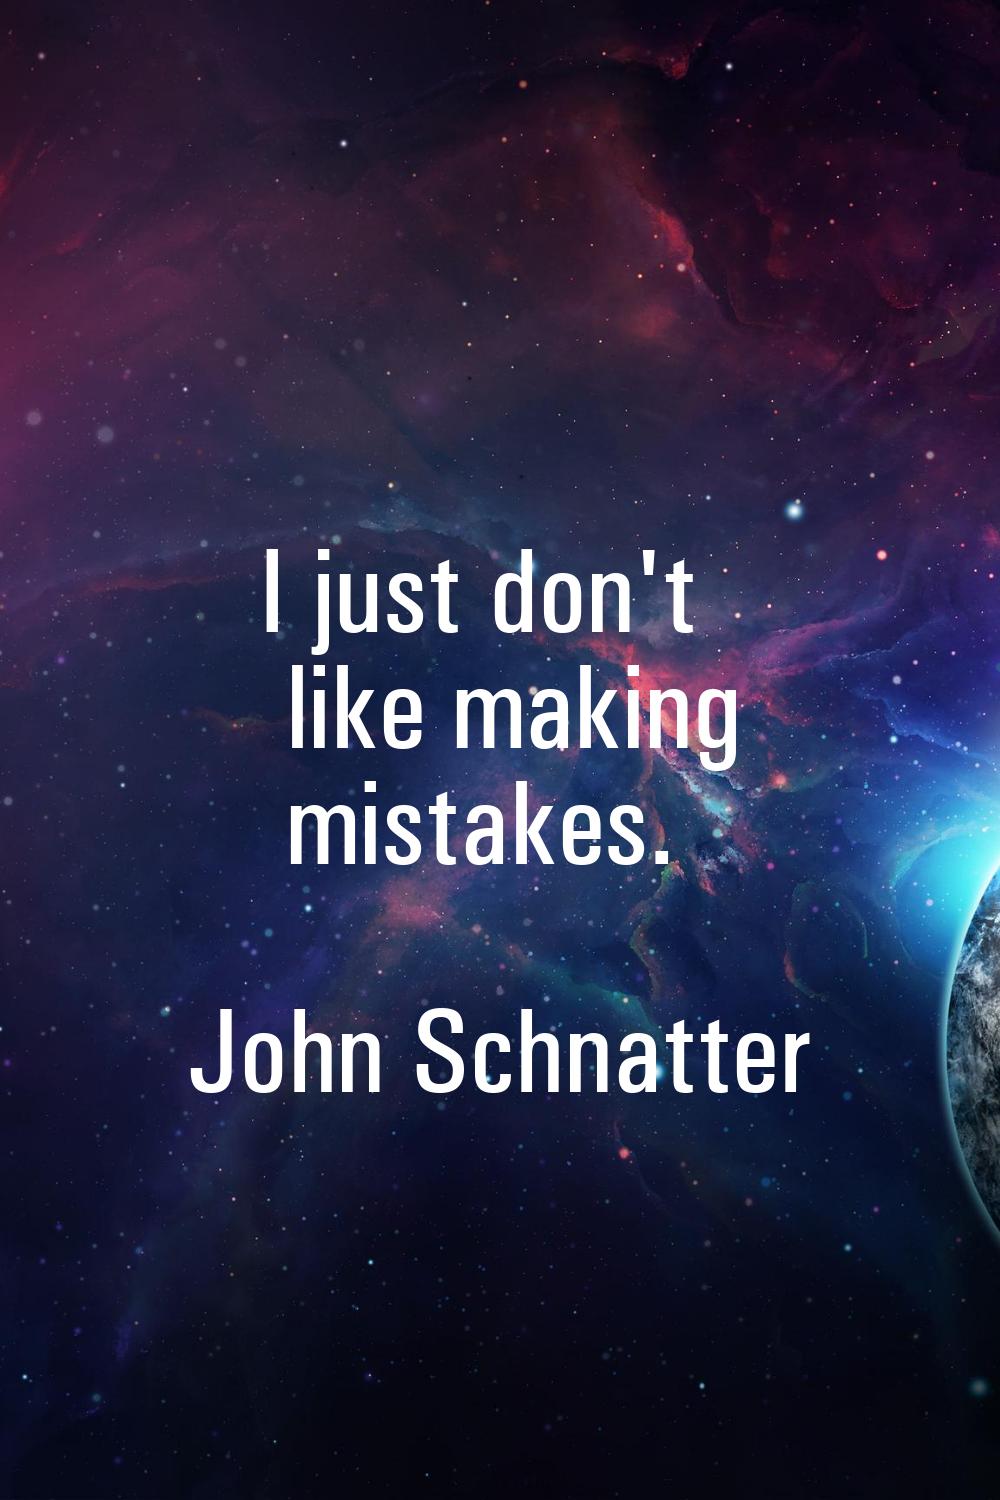 I just don't like making mistakes.